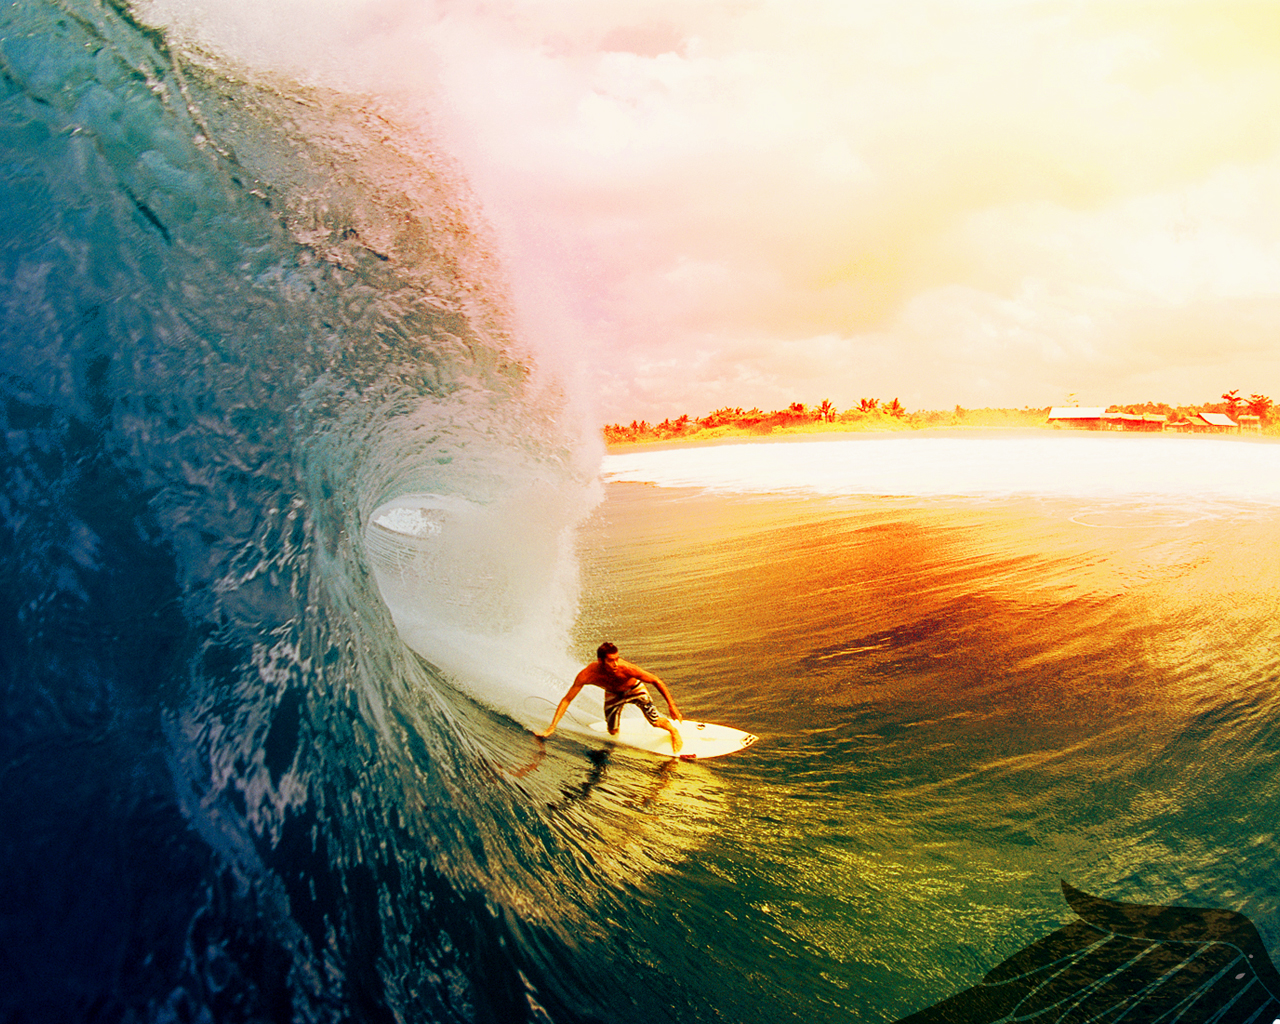  Big Waves Surf Wallpaper Surfing Pictures Surfing Wallpapers